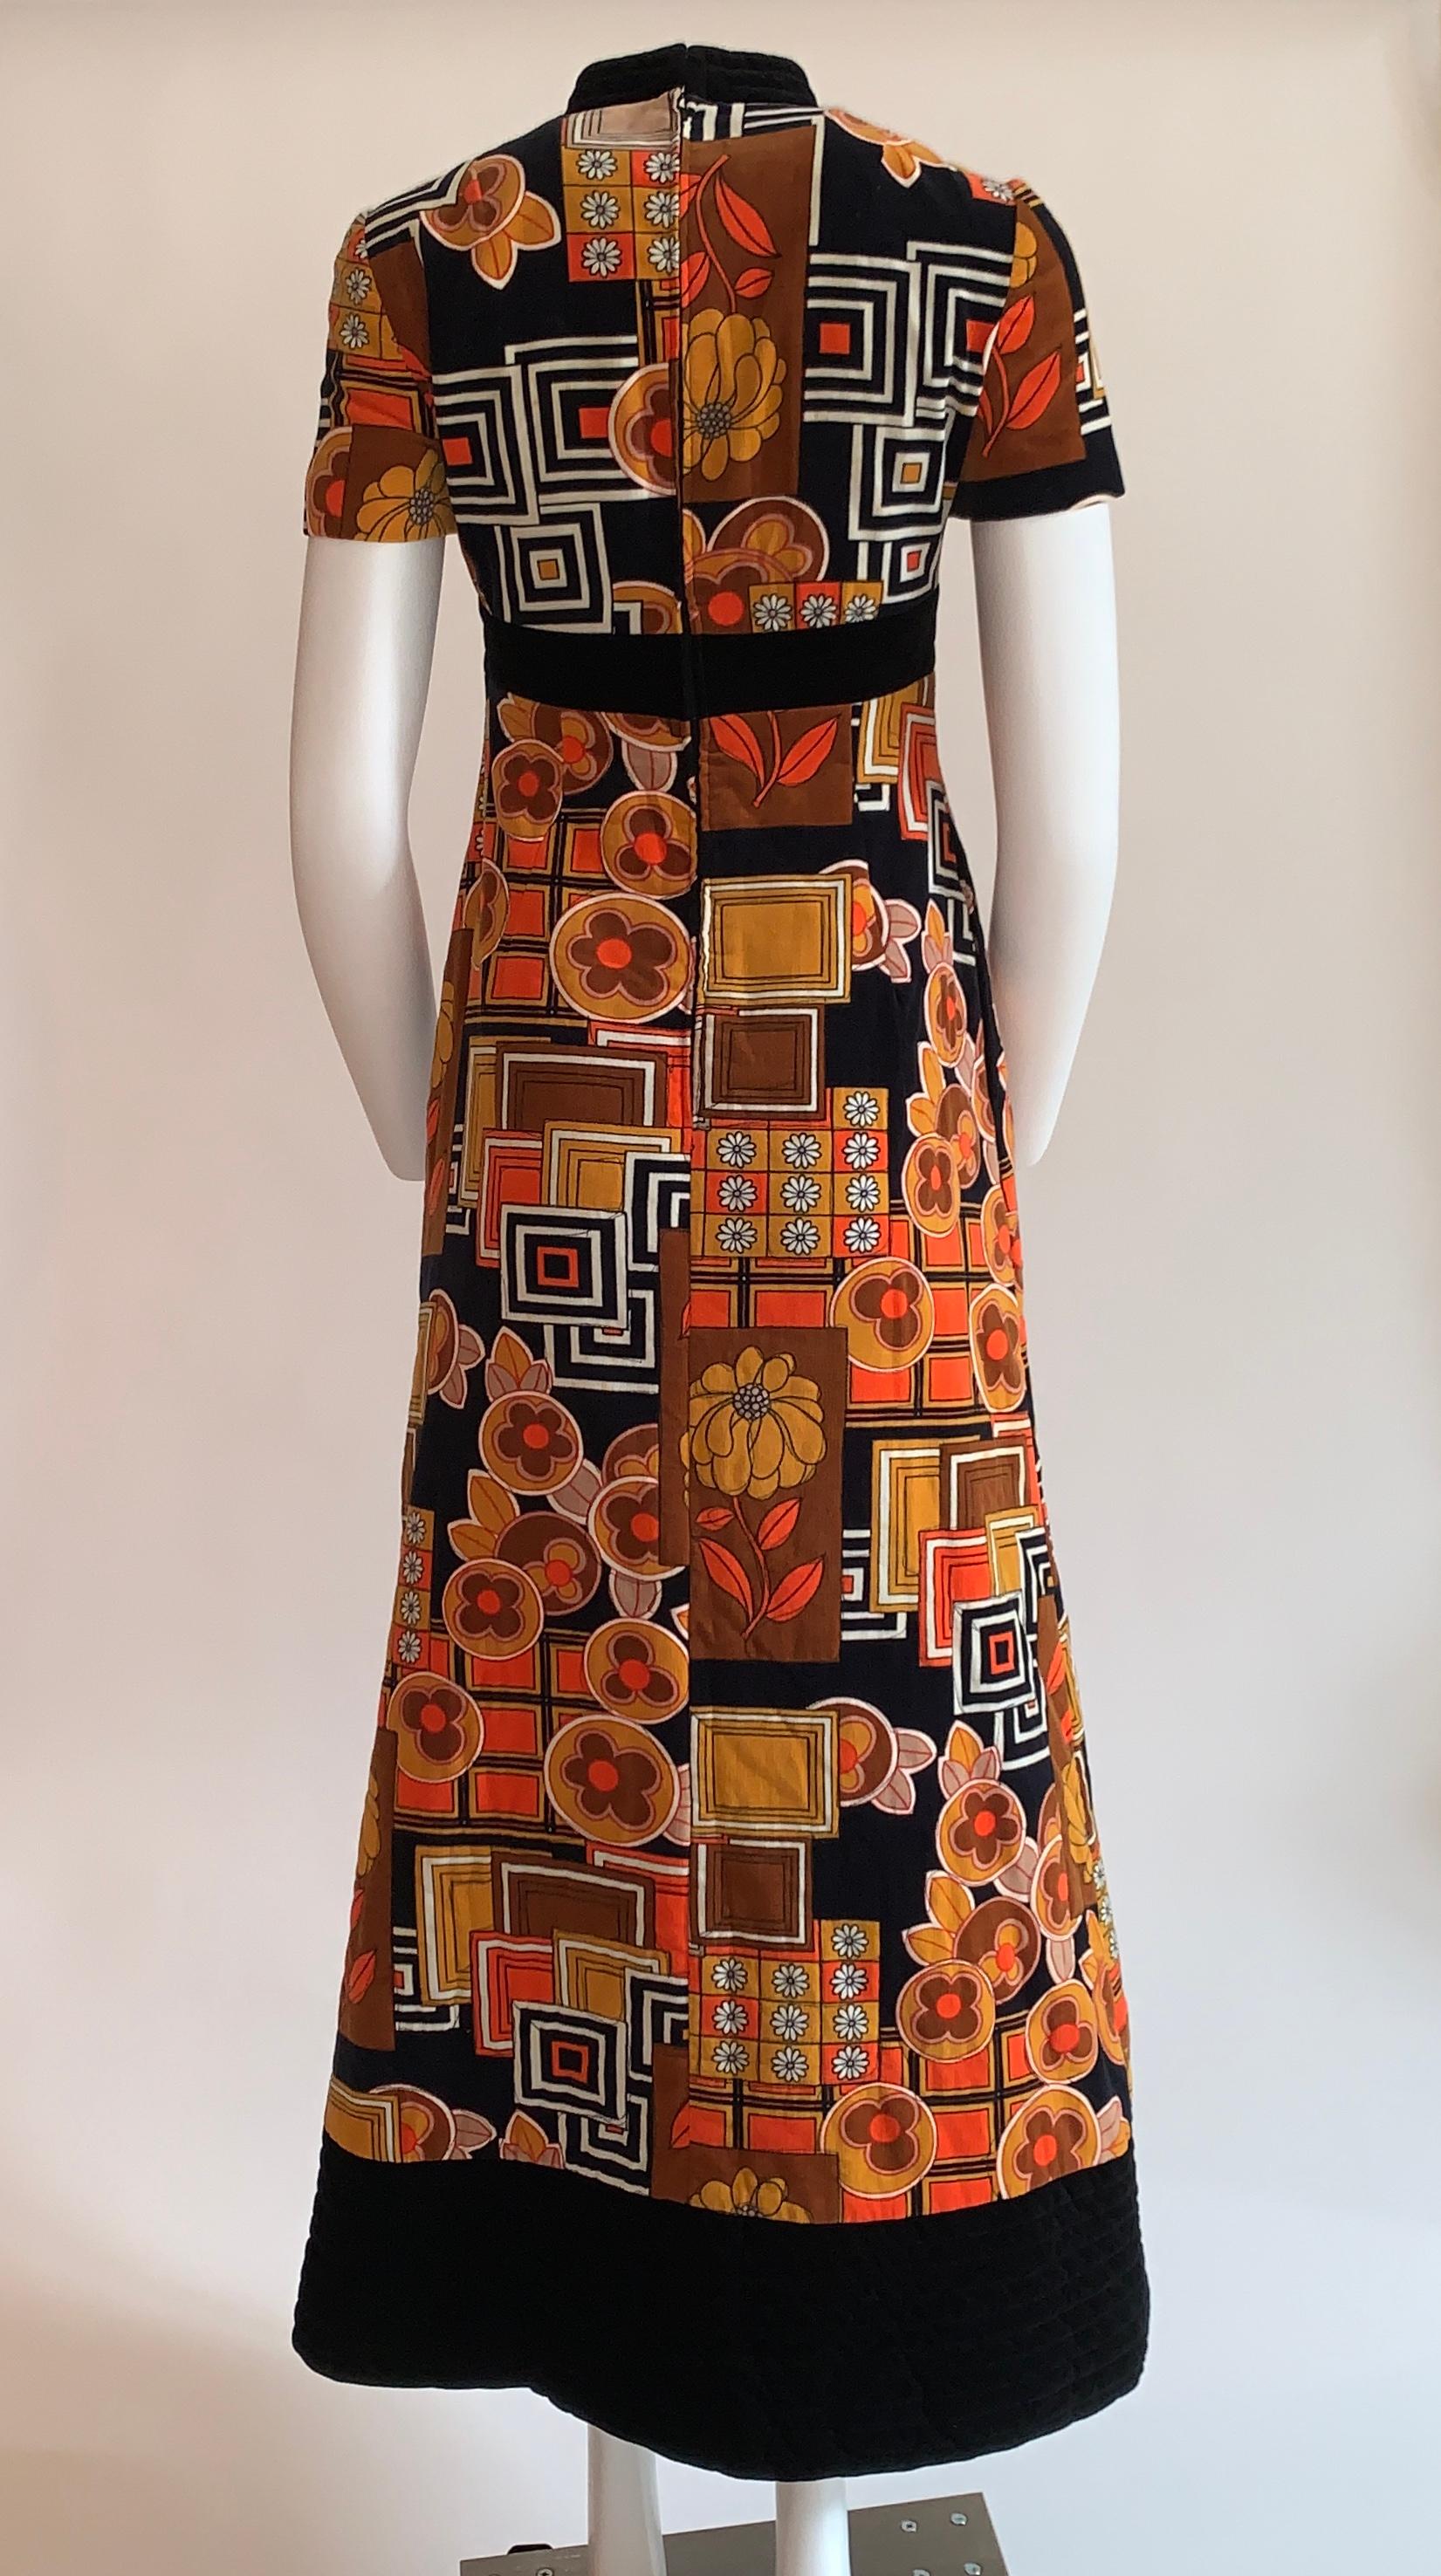 Vintage 1960s I. Magnin & Co. by Dynasty orange, brown and black floral print A-line quilted velvet maxi dress. Psychedelic floral and geometric pattern. Short sleeves and cheongsam inspired collar. Quilted band at waist. Back zip and hook and eye